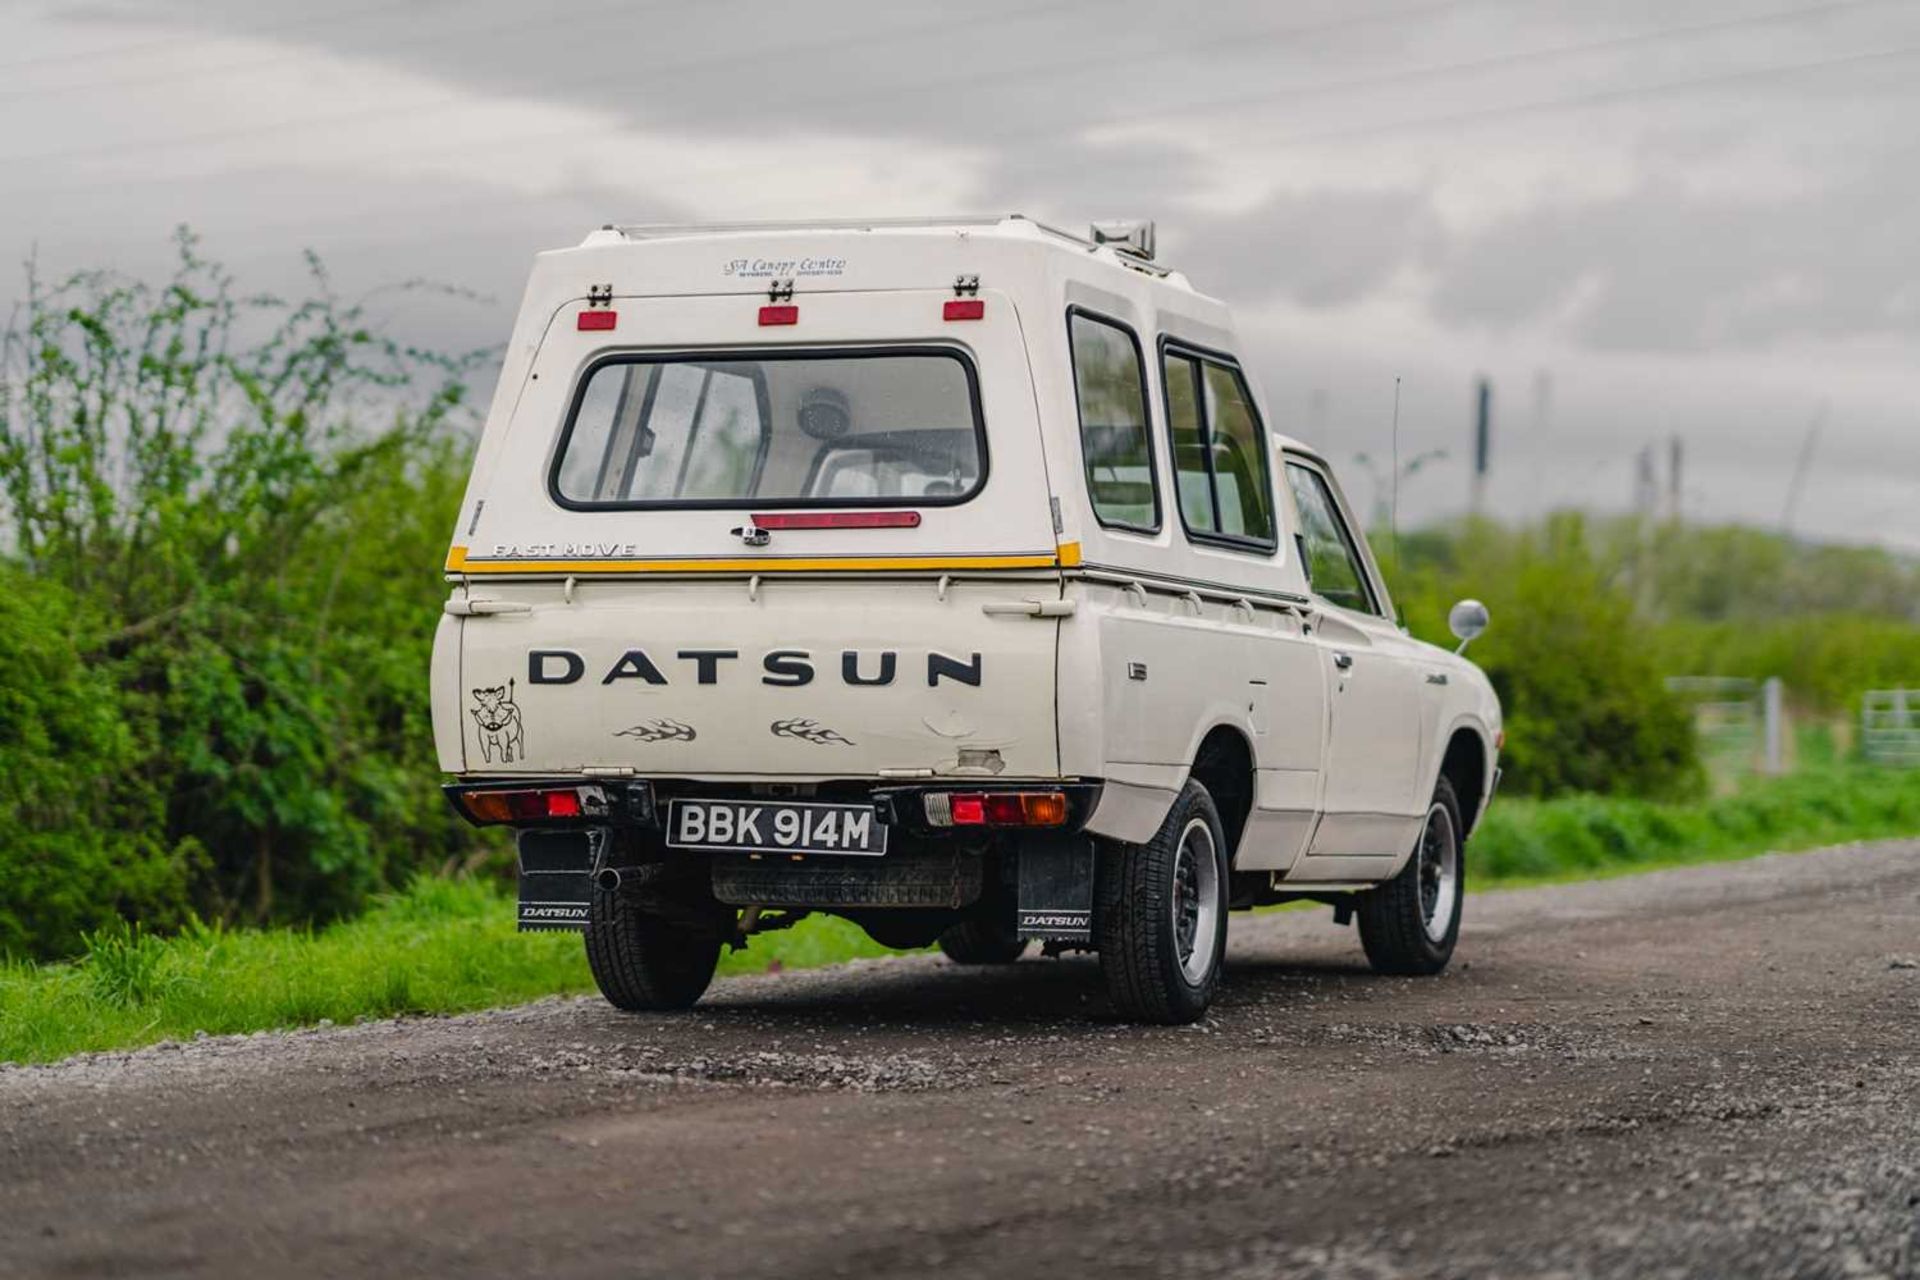 1974 Datsun 620 Pick-up Former museum exhibit in South Africa - Image 14 of 60